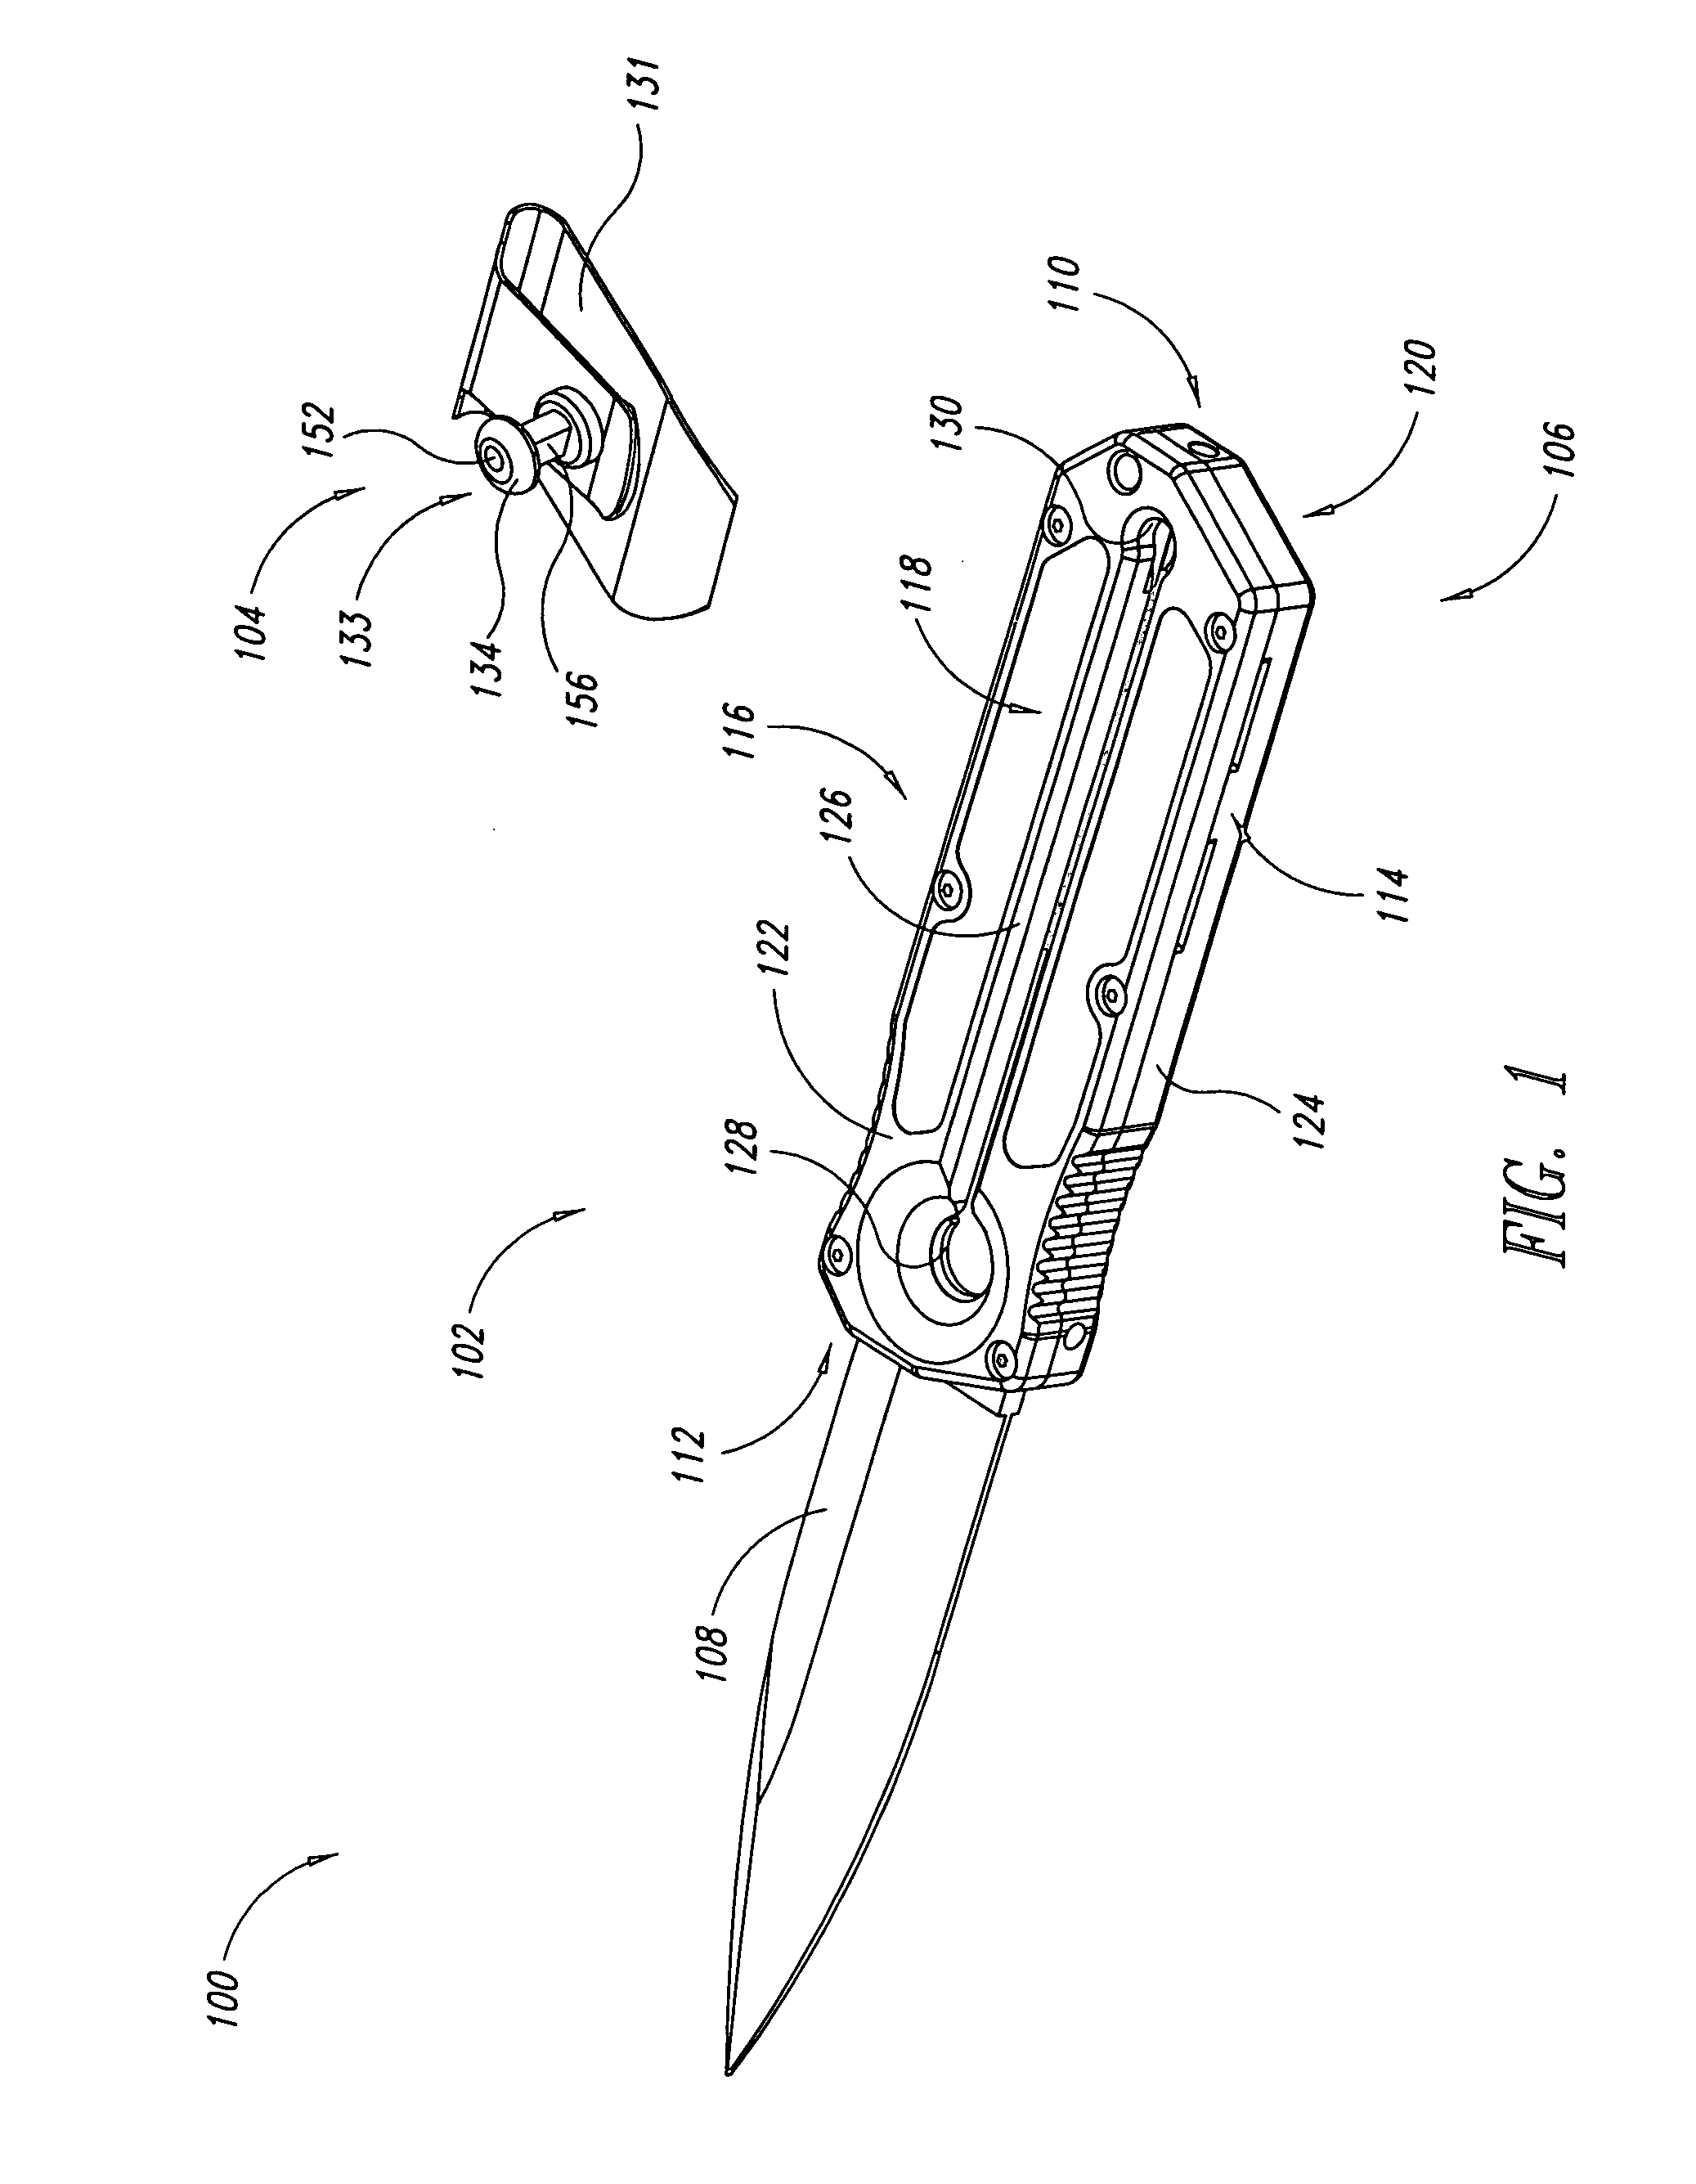 Knife with sliding blade and disengageable deployment mechanism